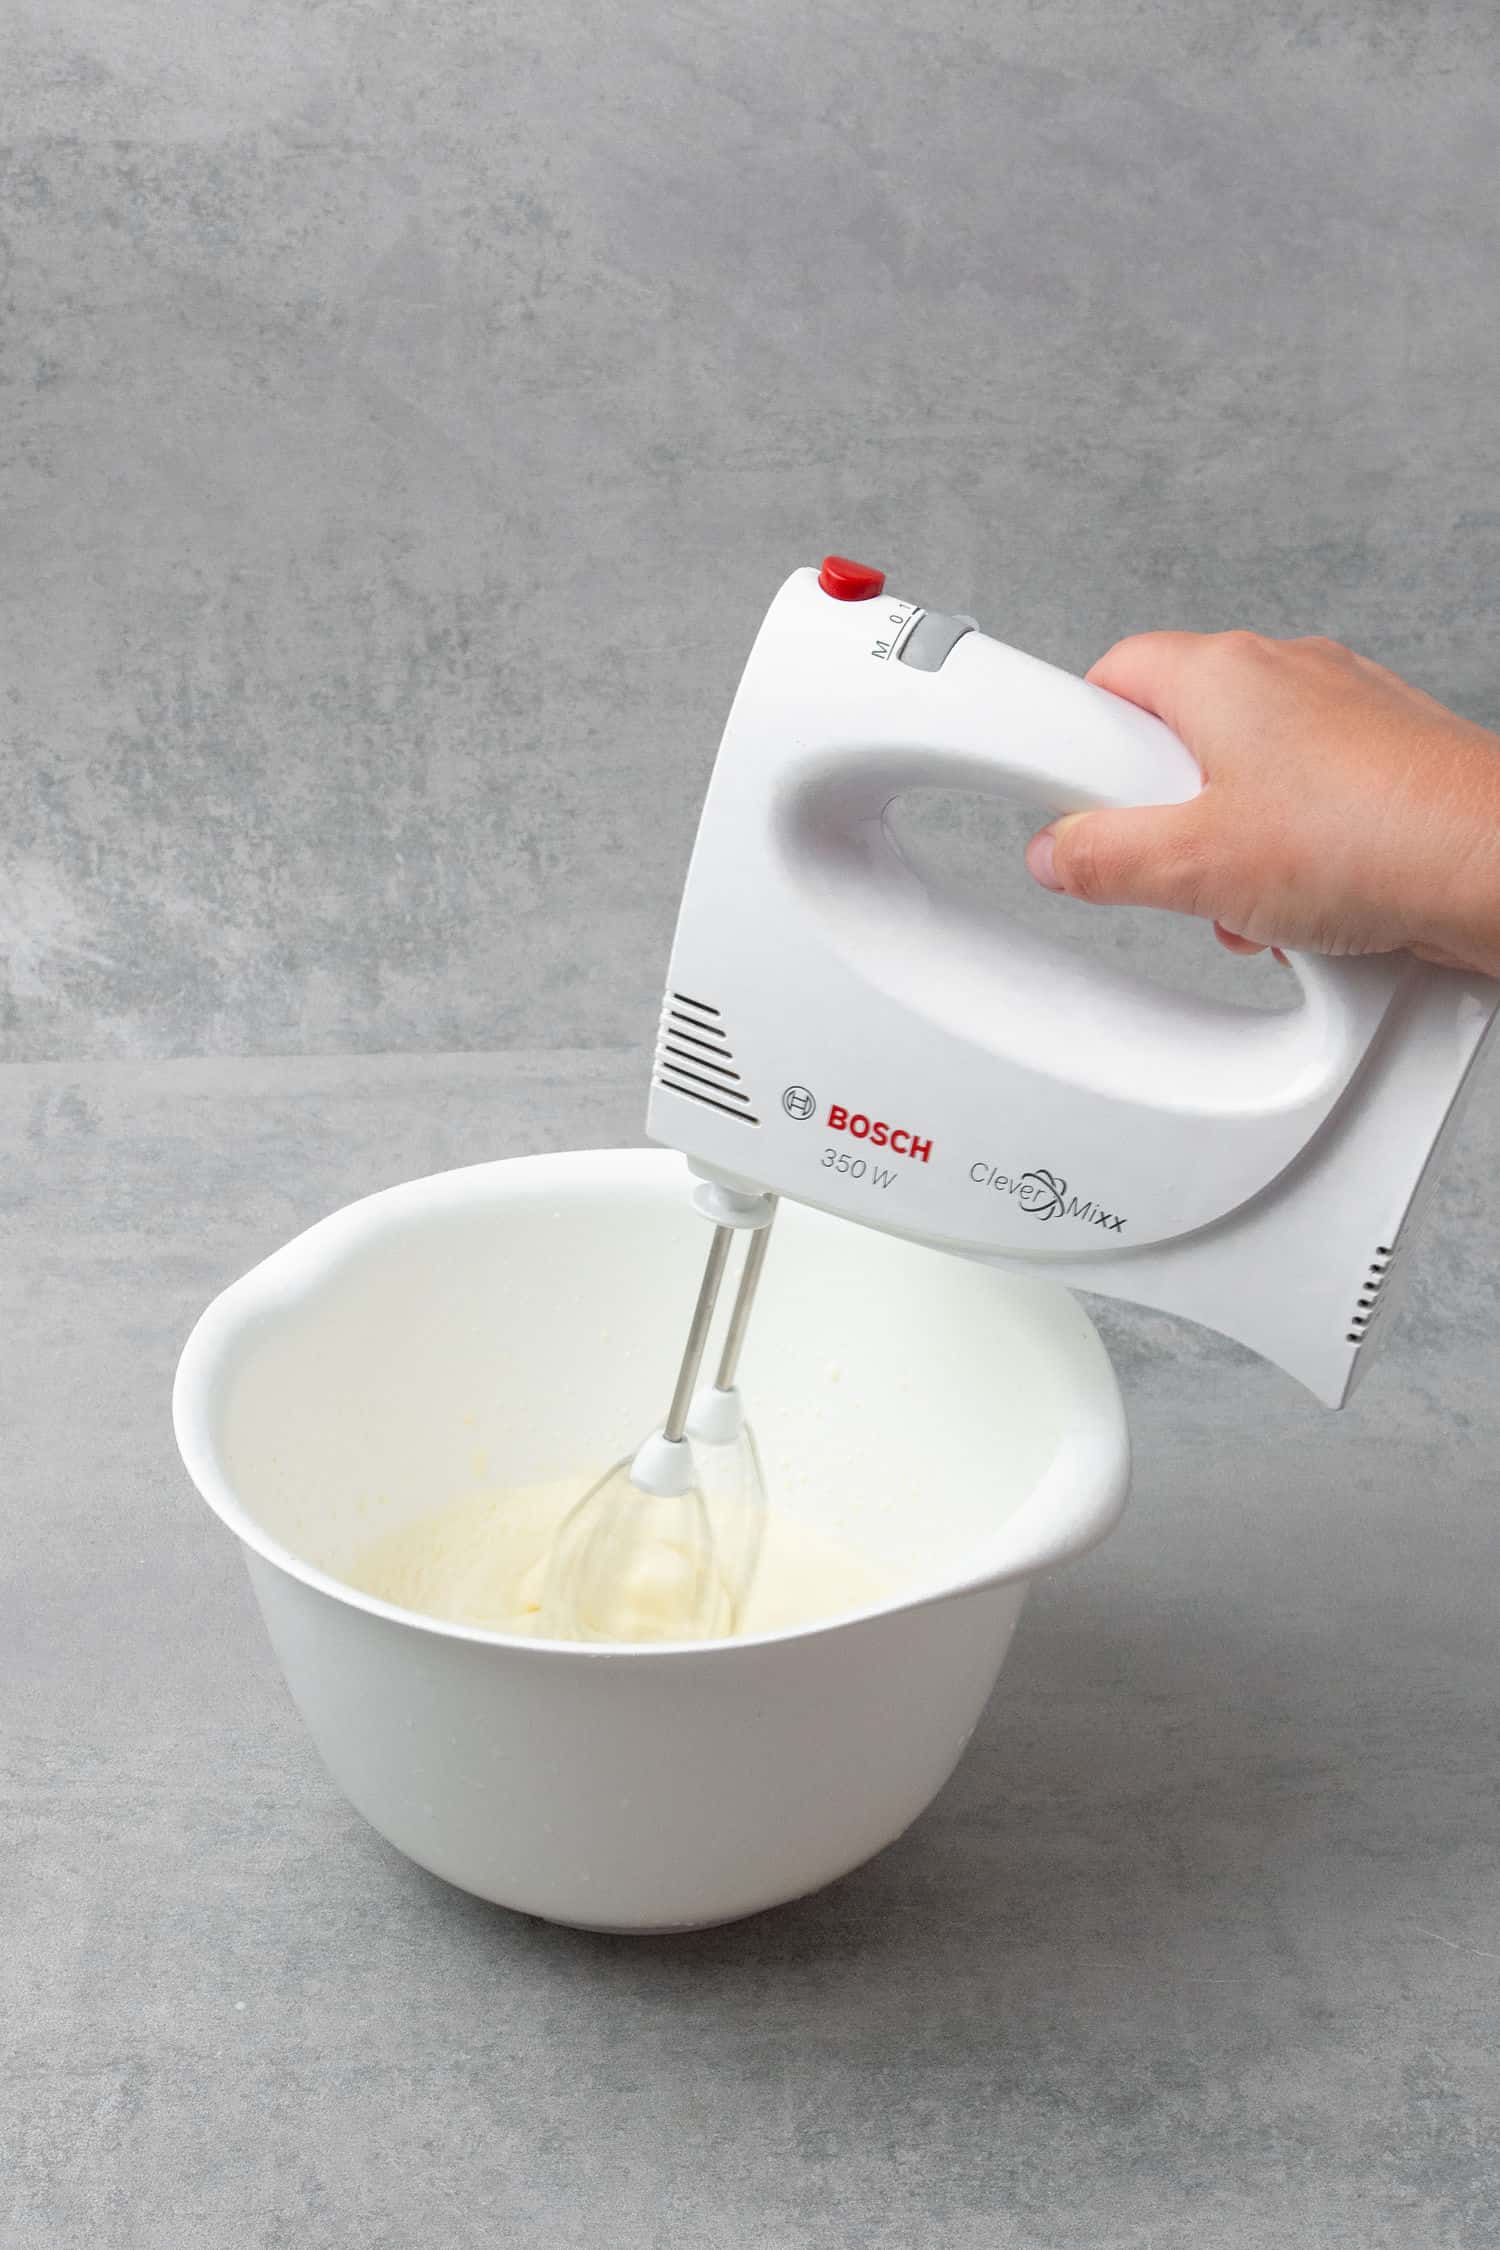 Making whipped cream for decoration in a bowl with an electric hand mixer